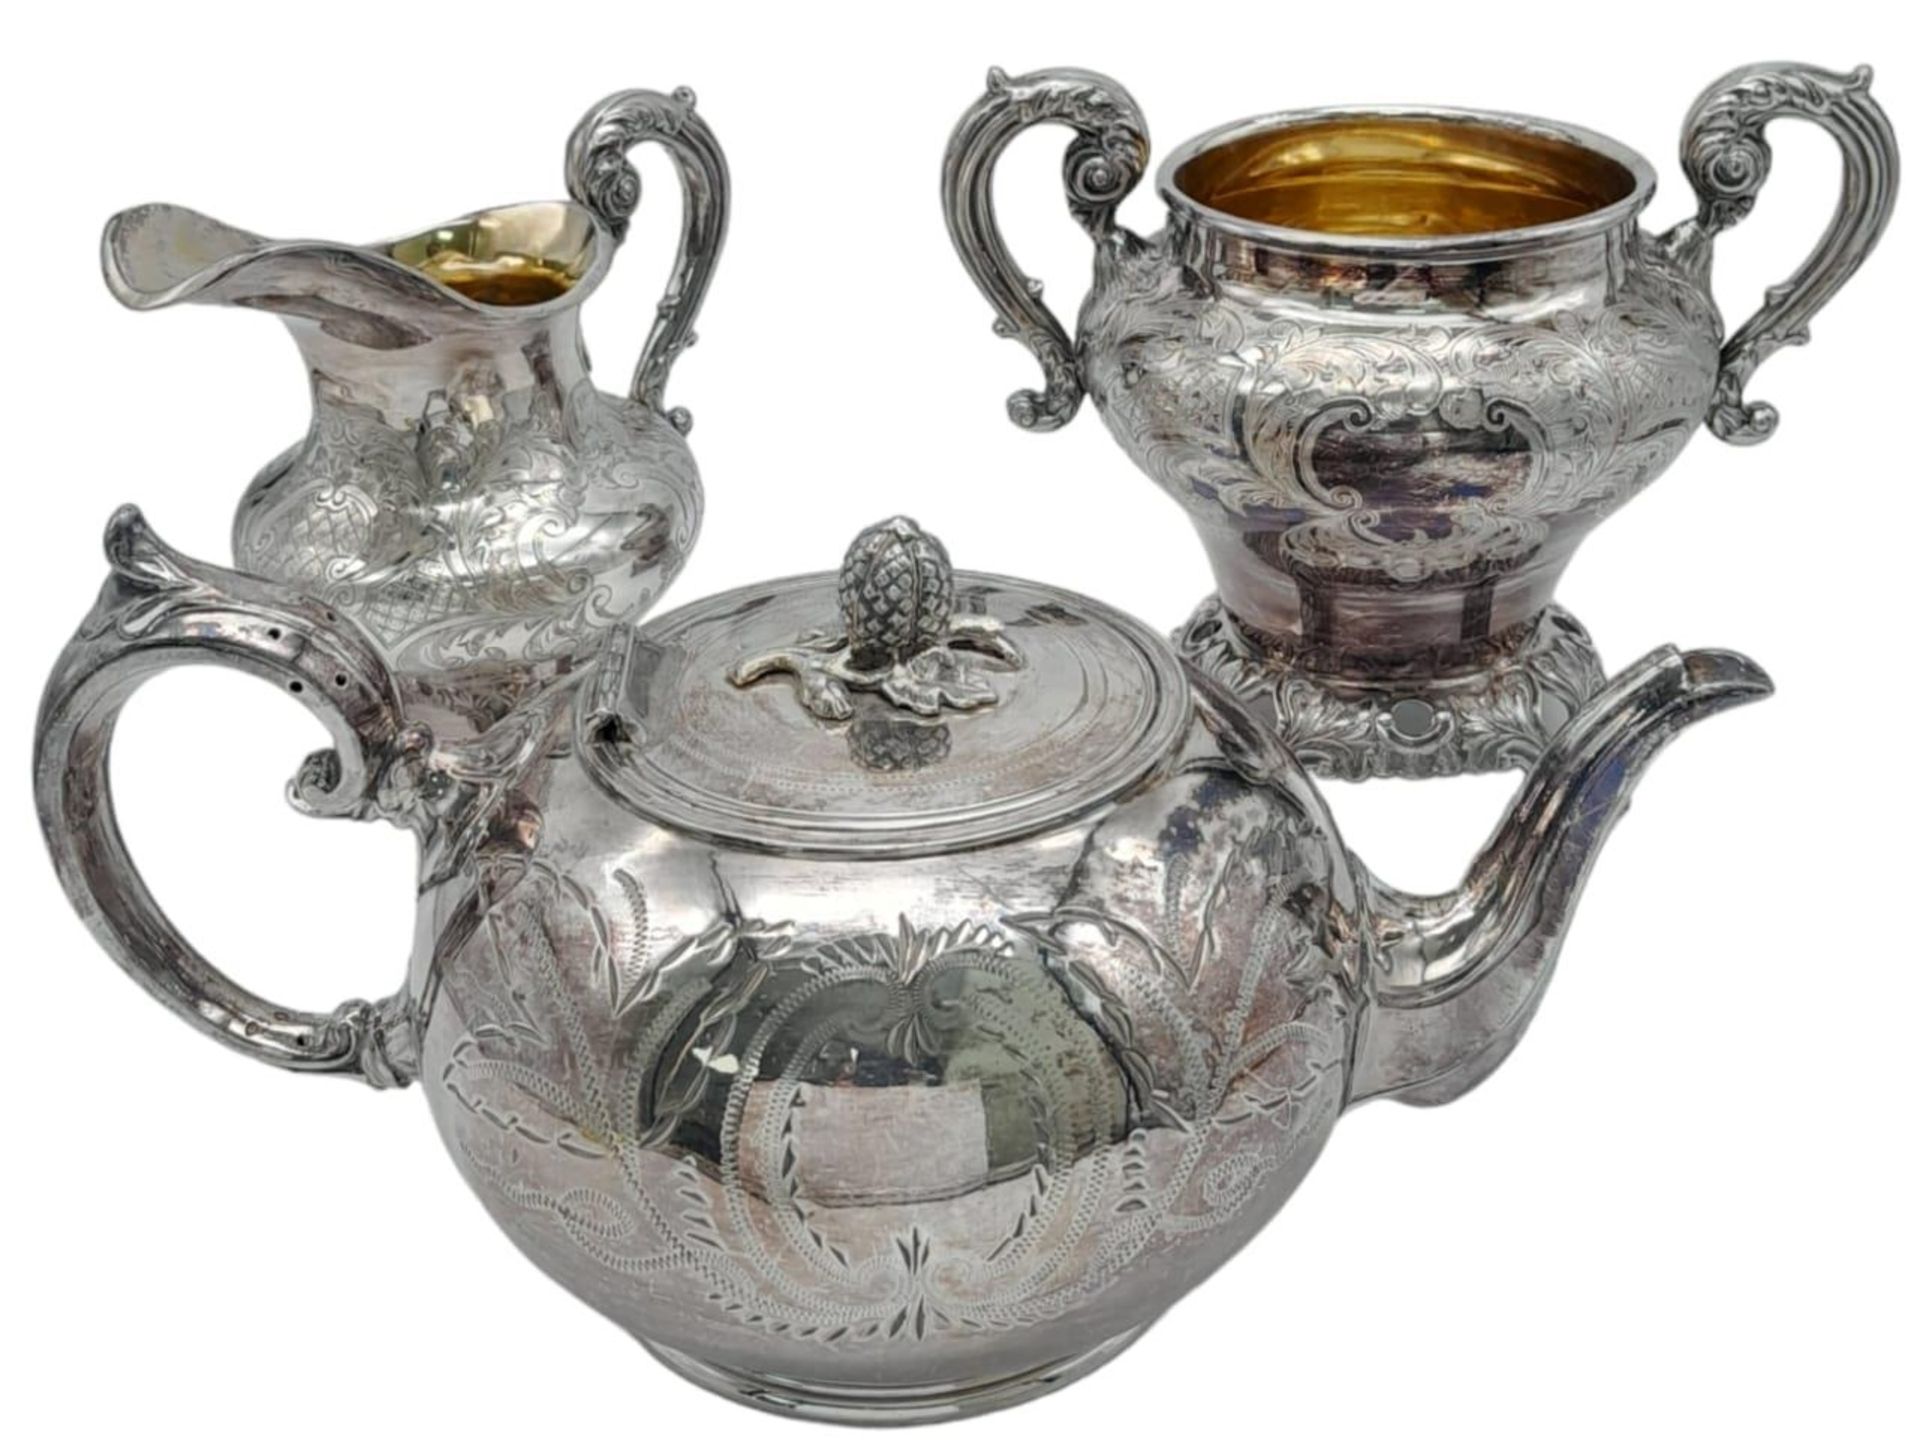 A Three-Piece Antique Silver Plated Tea Set. Includes a teapot, creamer and sugar bowl - with gilded